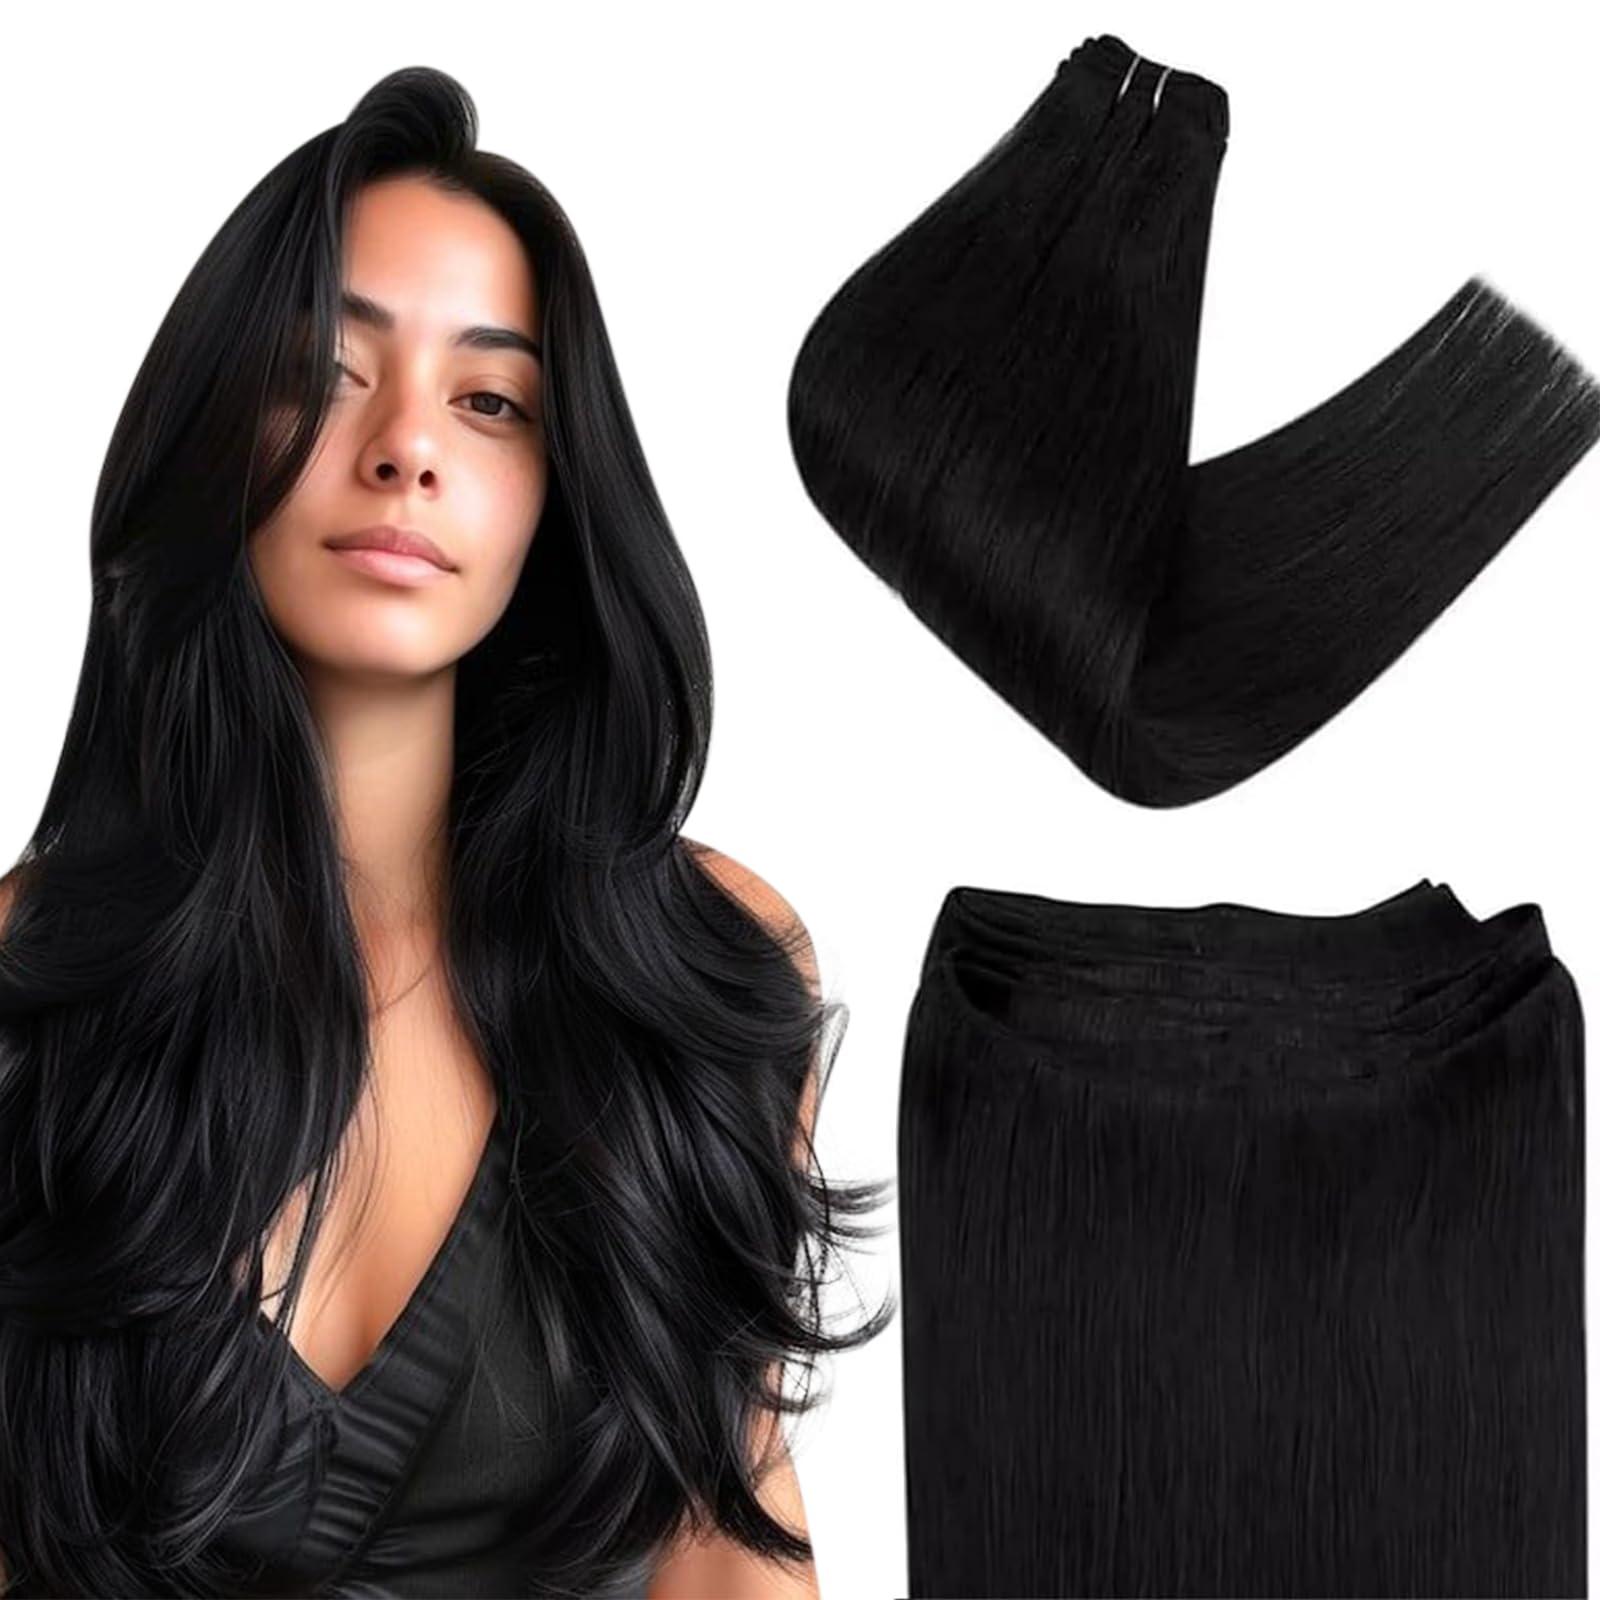 Easyouth Weft Hair Extensions Human Hair Black Sew in Weft Extensions Real Hair 12 Inch 70g Jet Black Sew in Hair Extensions Double Weft Hair Remy